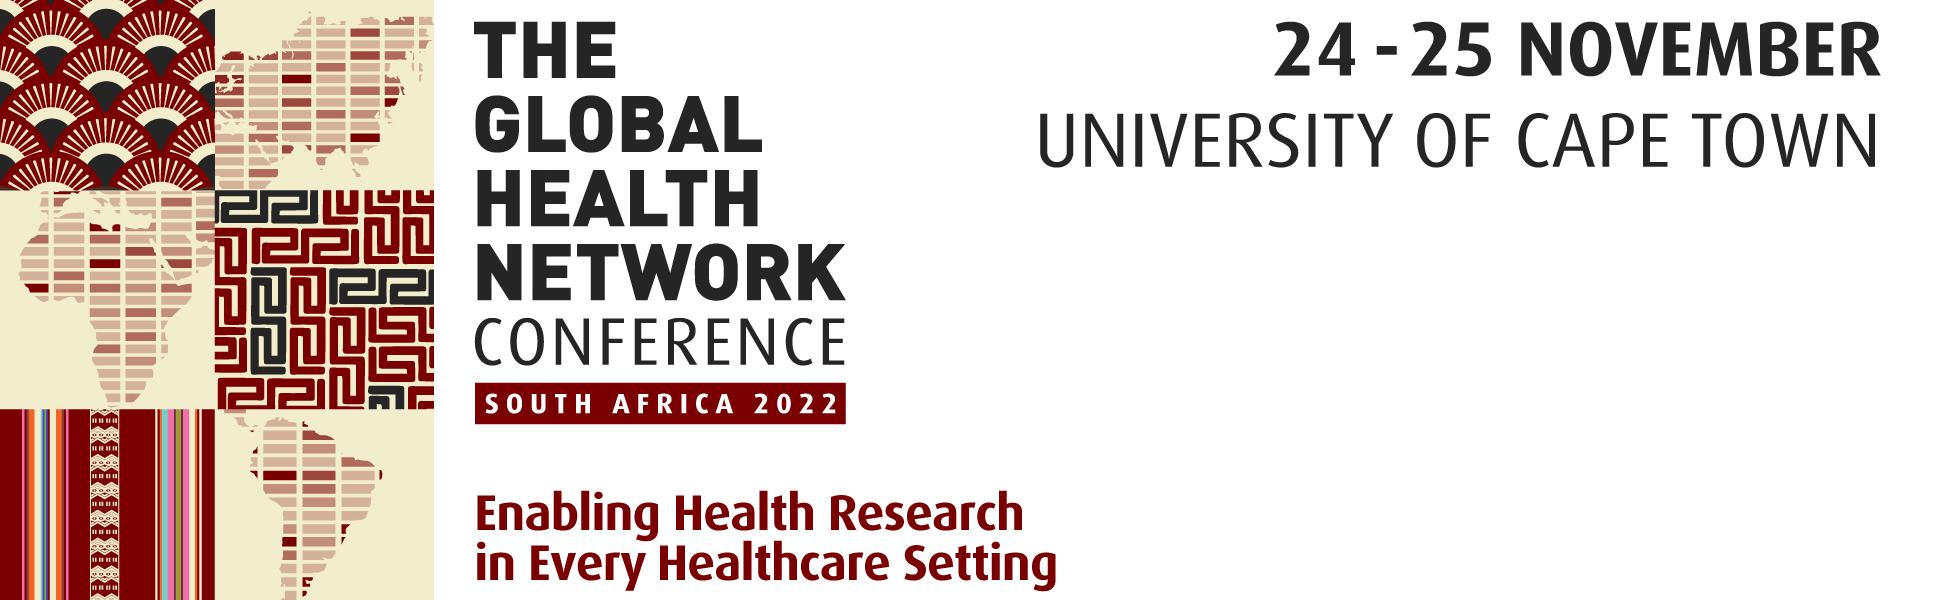 Banner of the Global Health Network Conference 2022